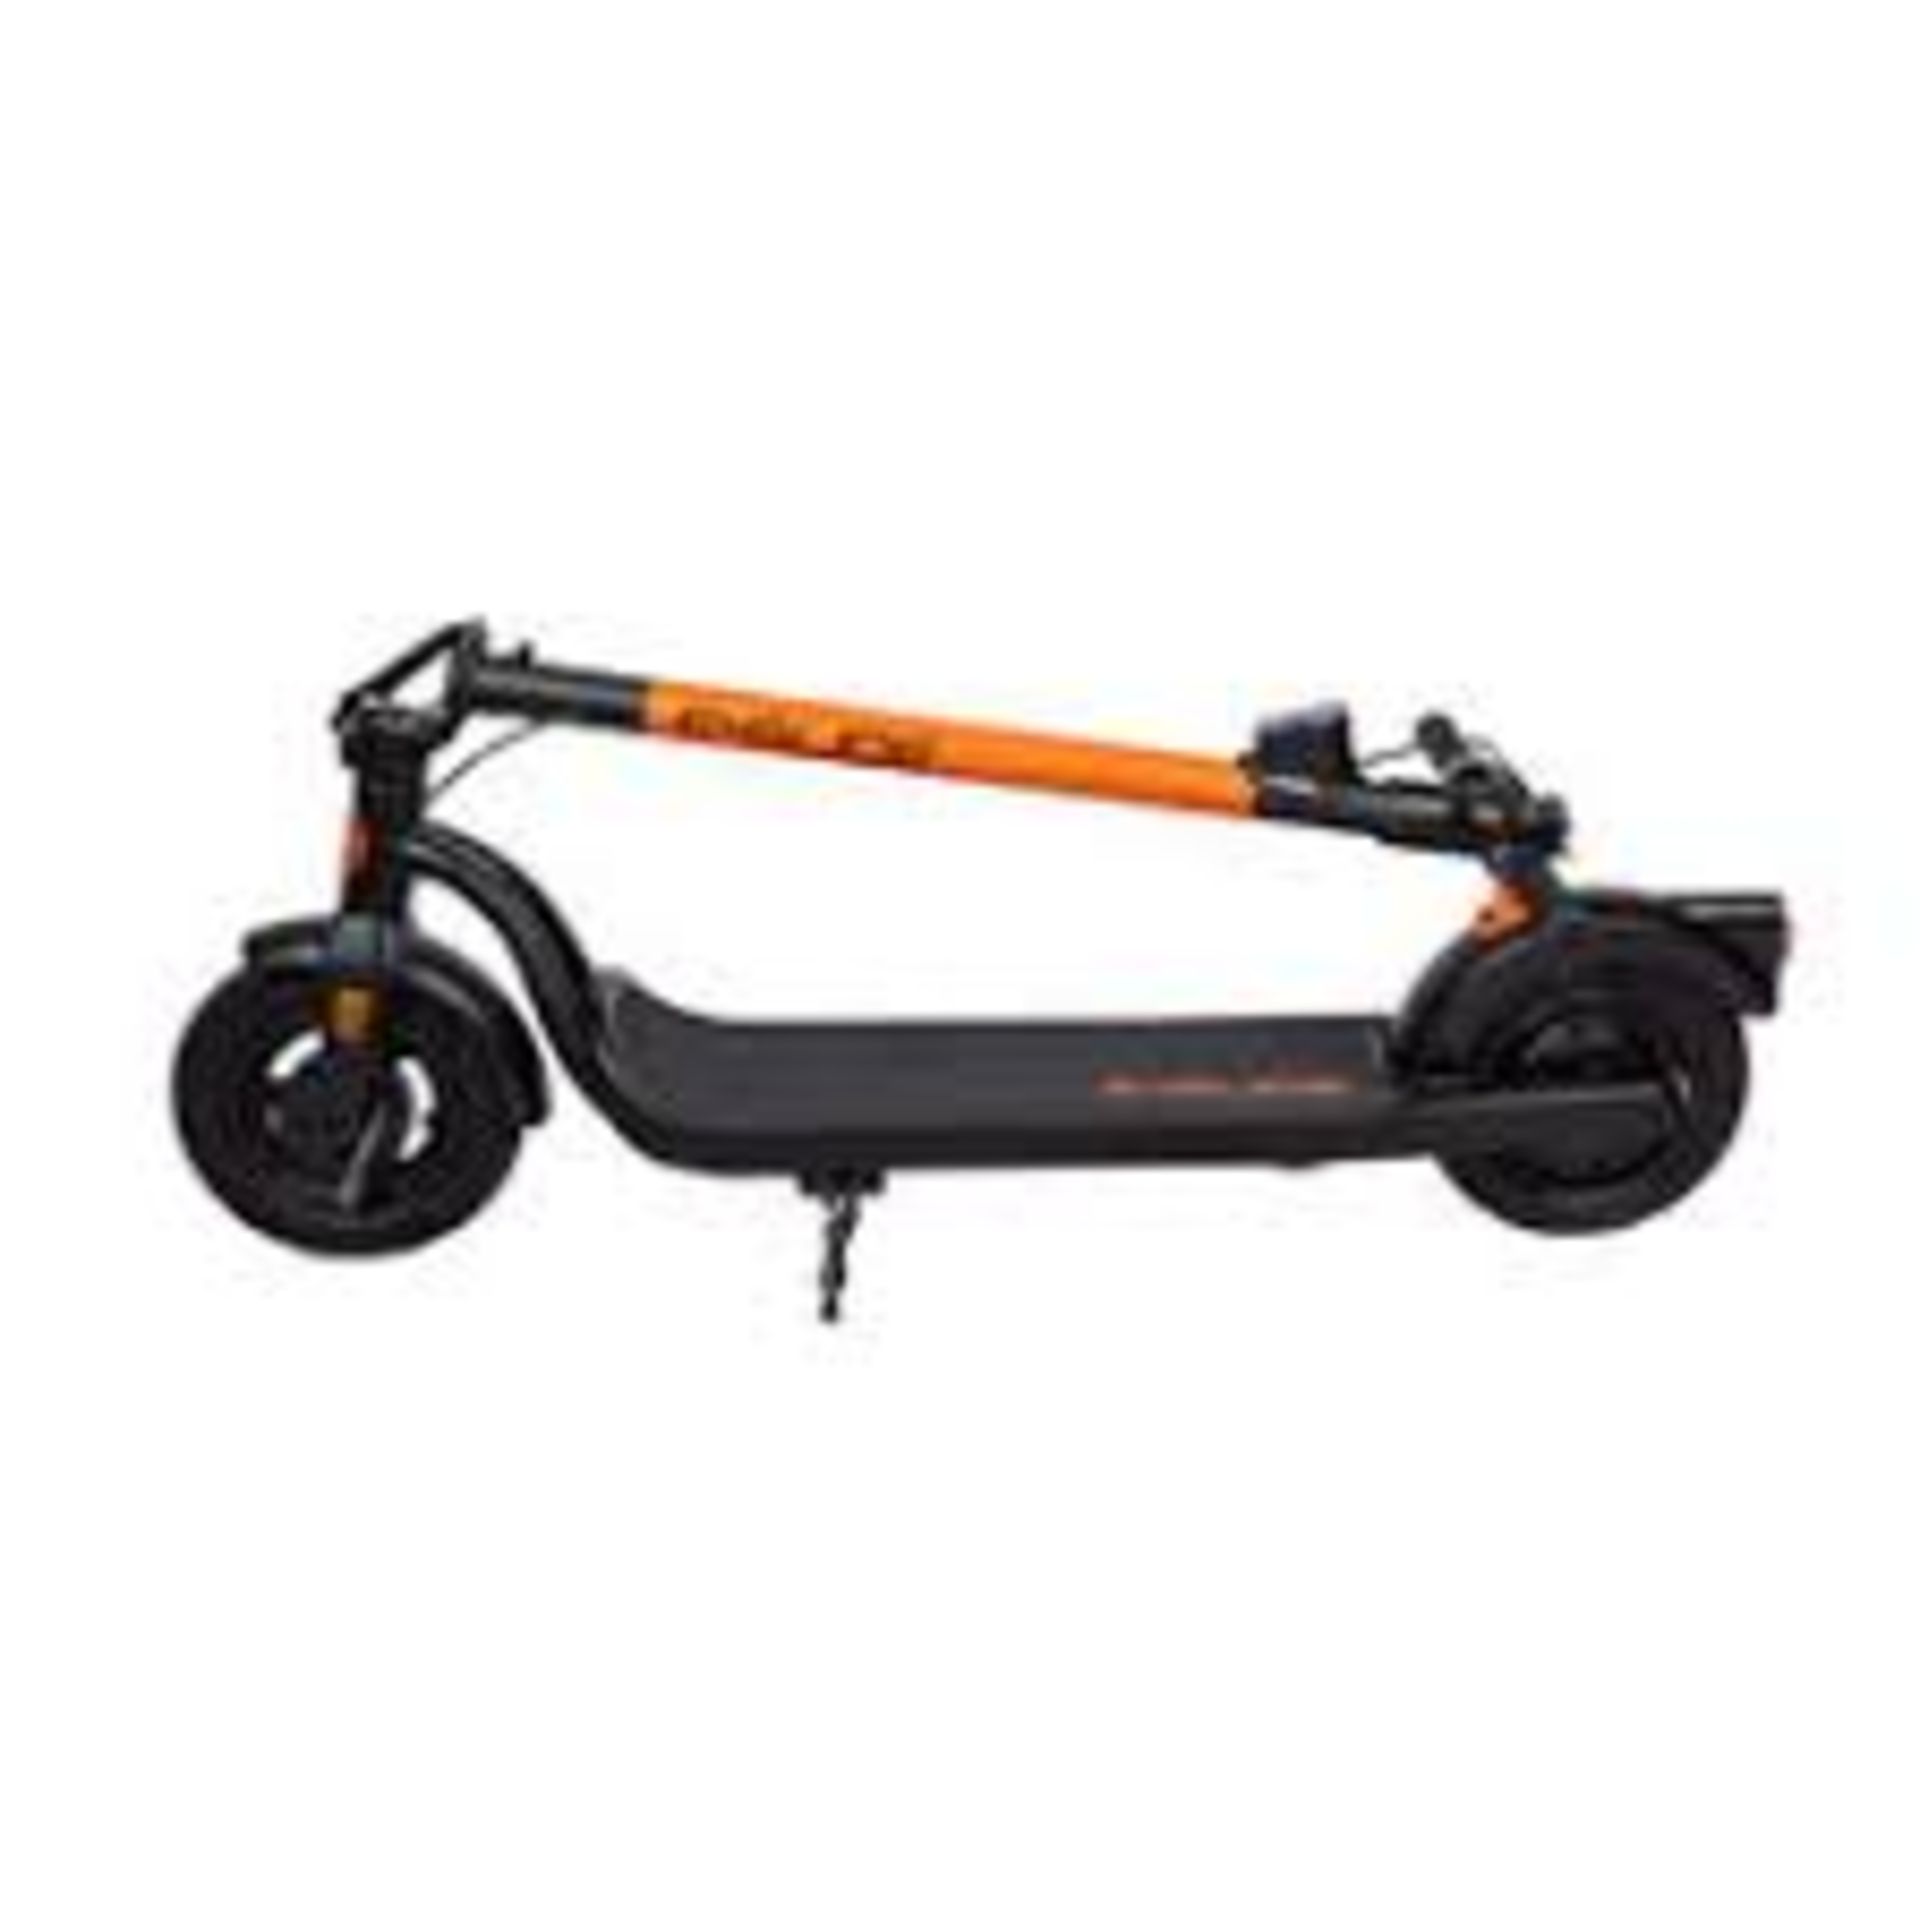 Trade Lot 4 x Brand New E-Glide V2 Electric Scooter Orange and Black RRP £599, Introducing a sleek - Image 2 of 3